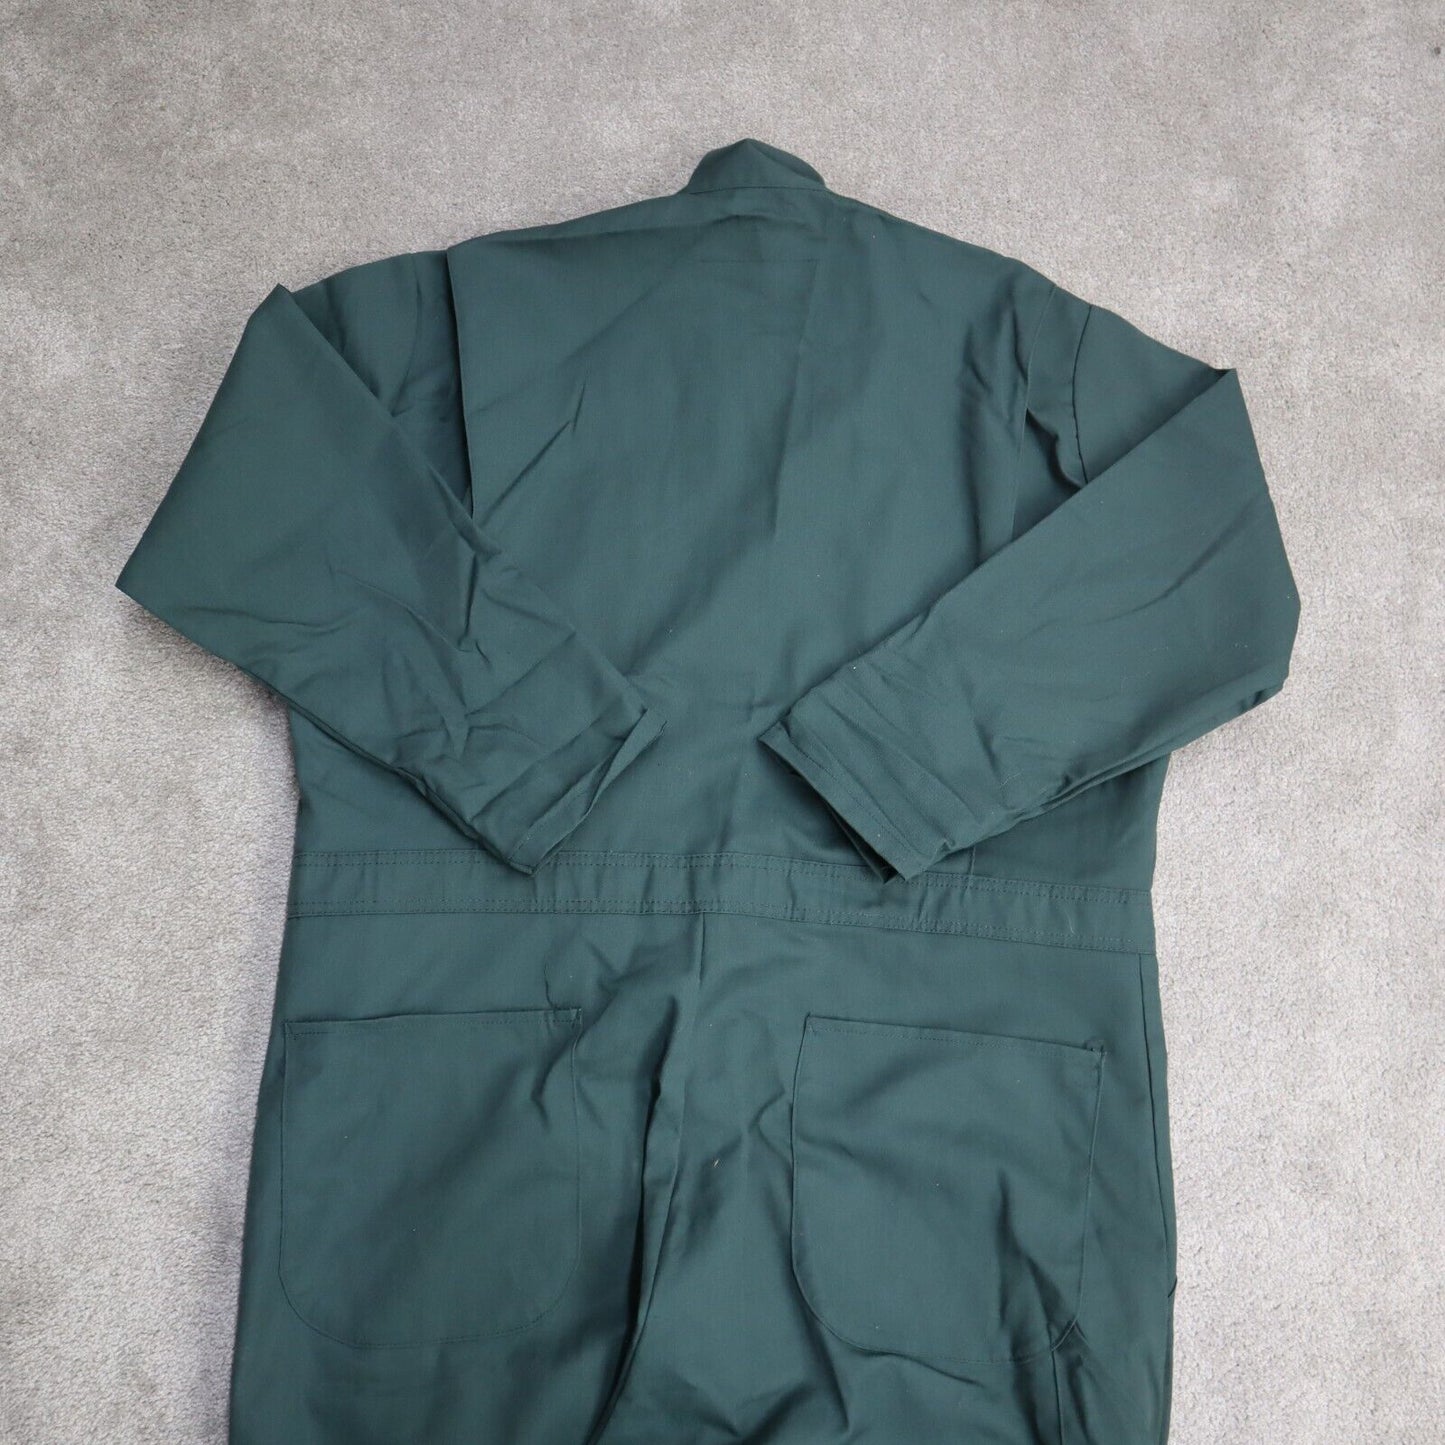 Red Kap Mens Insulated Coverall Jumpsuit Long Sleeve Teal Green Size 48 Regular